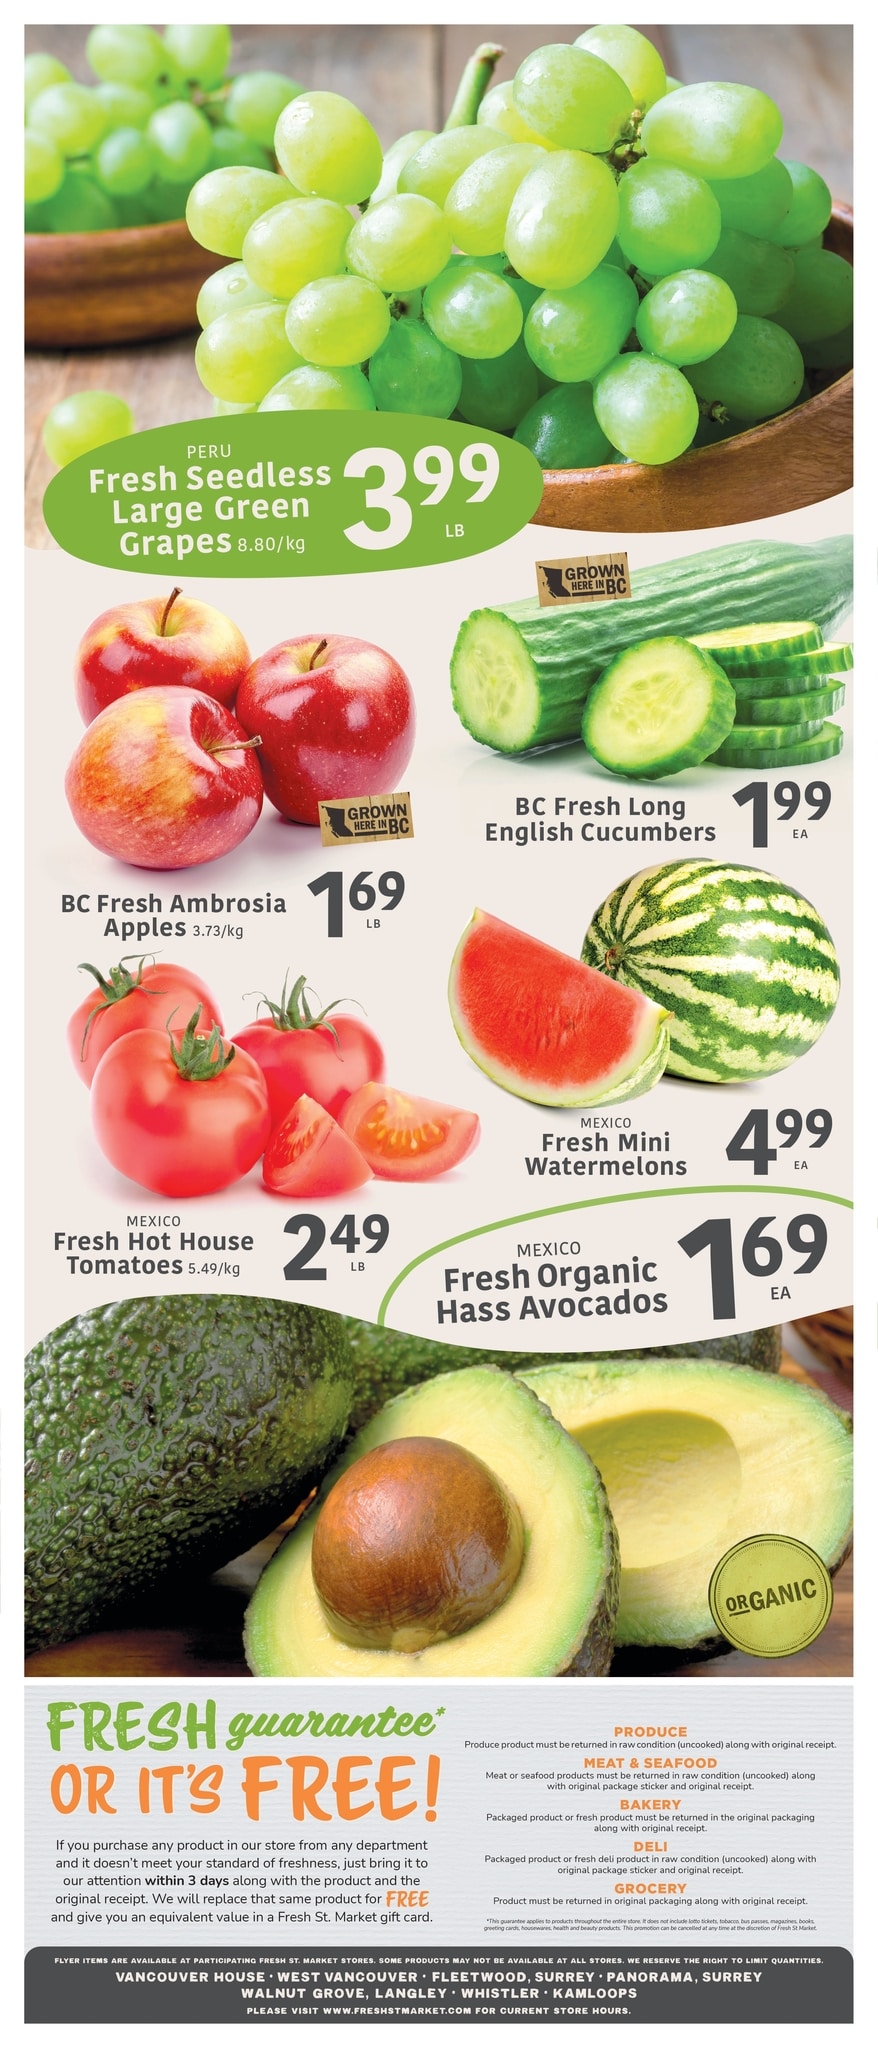 Fresh St. Market - Weekly Flyer Specials - Page 4